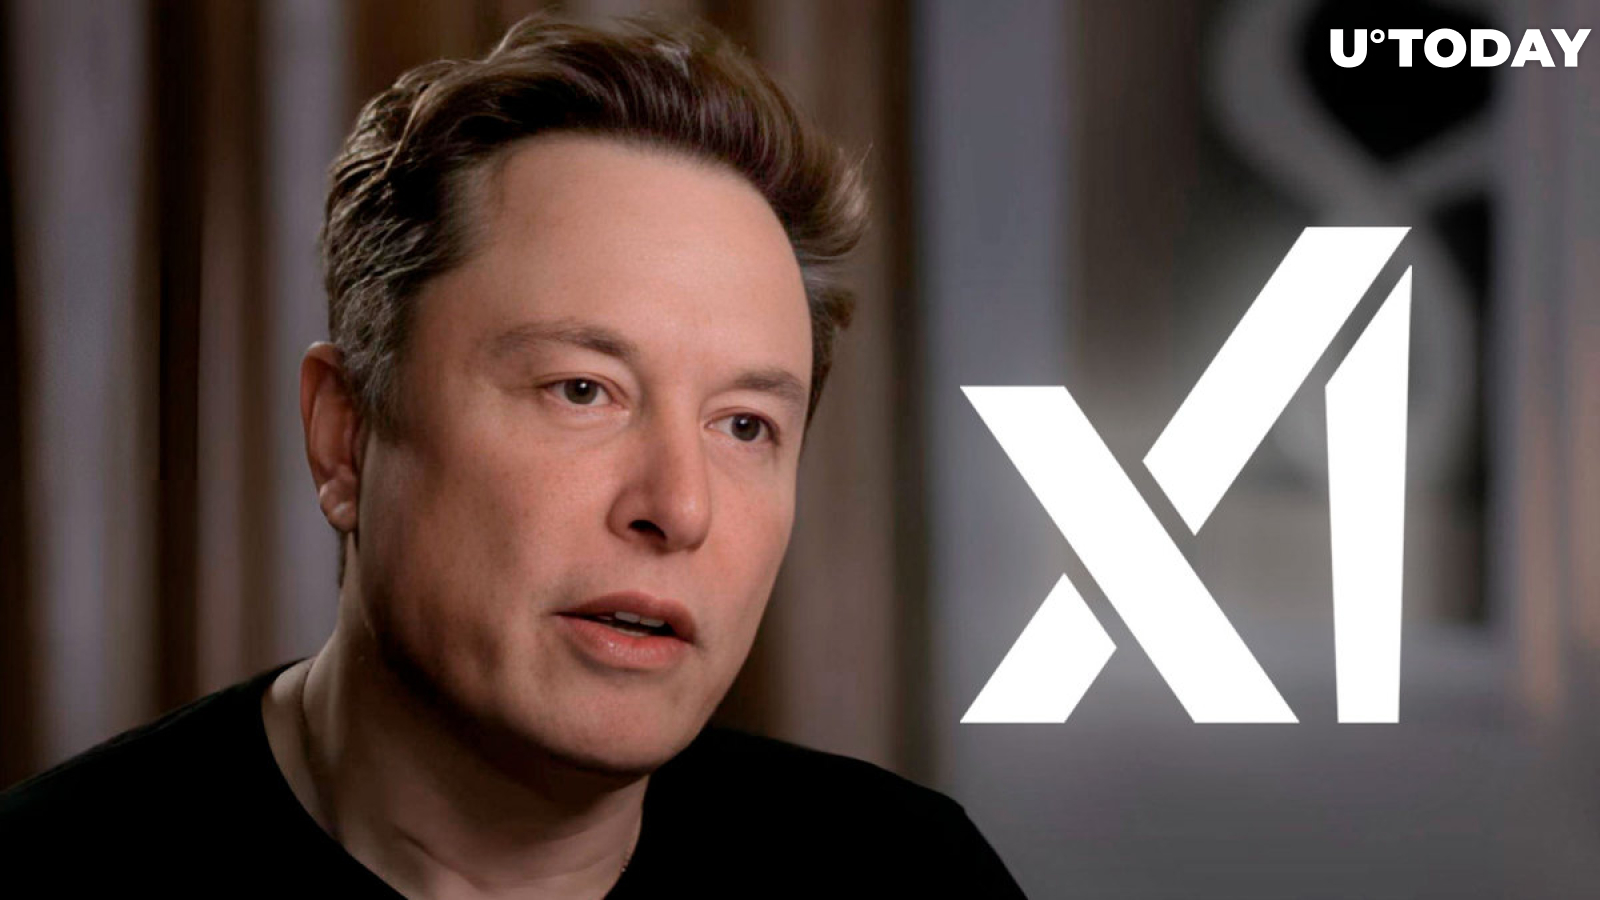 Elon Musk Debuts XAI, New ChatGPT Rival: Here's How to Get In